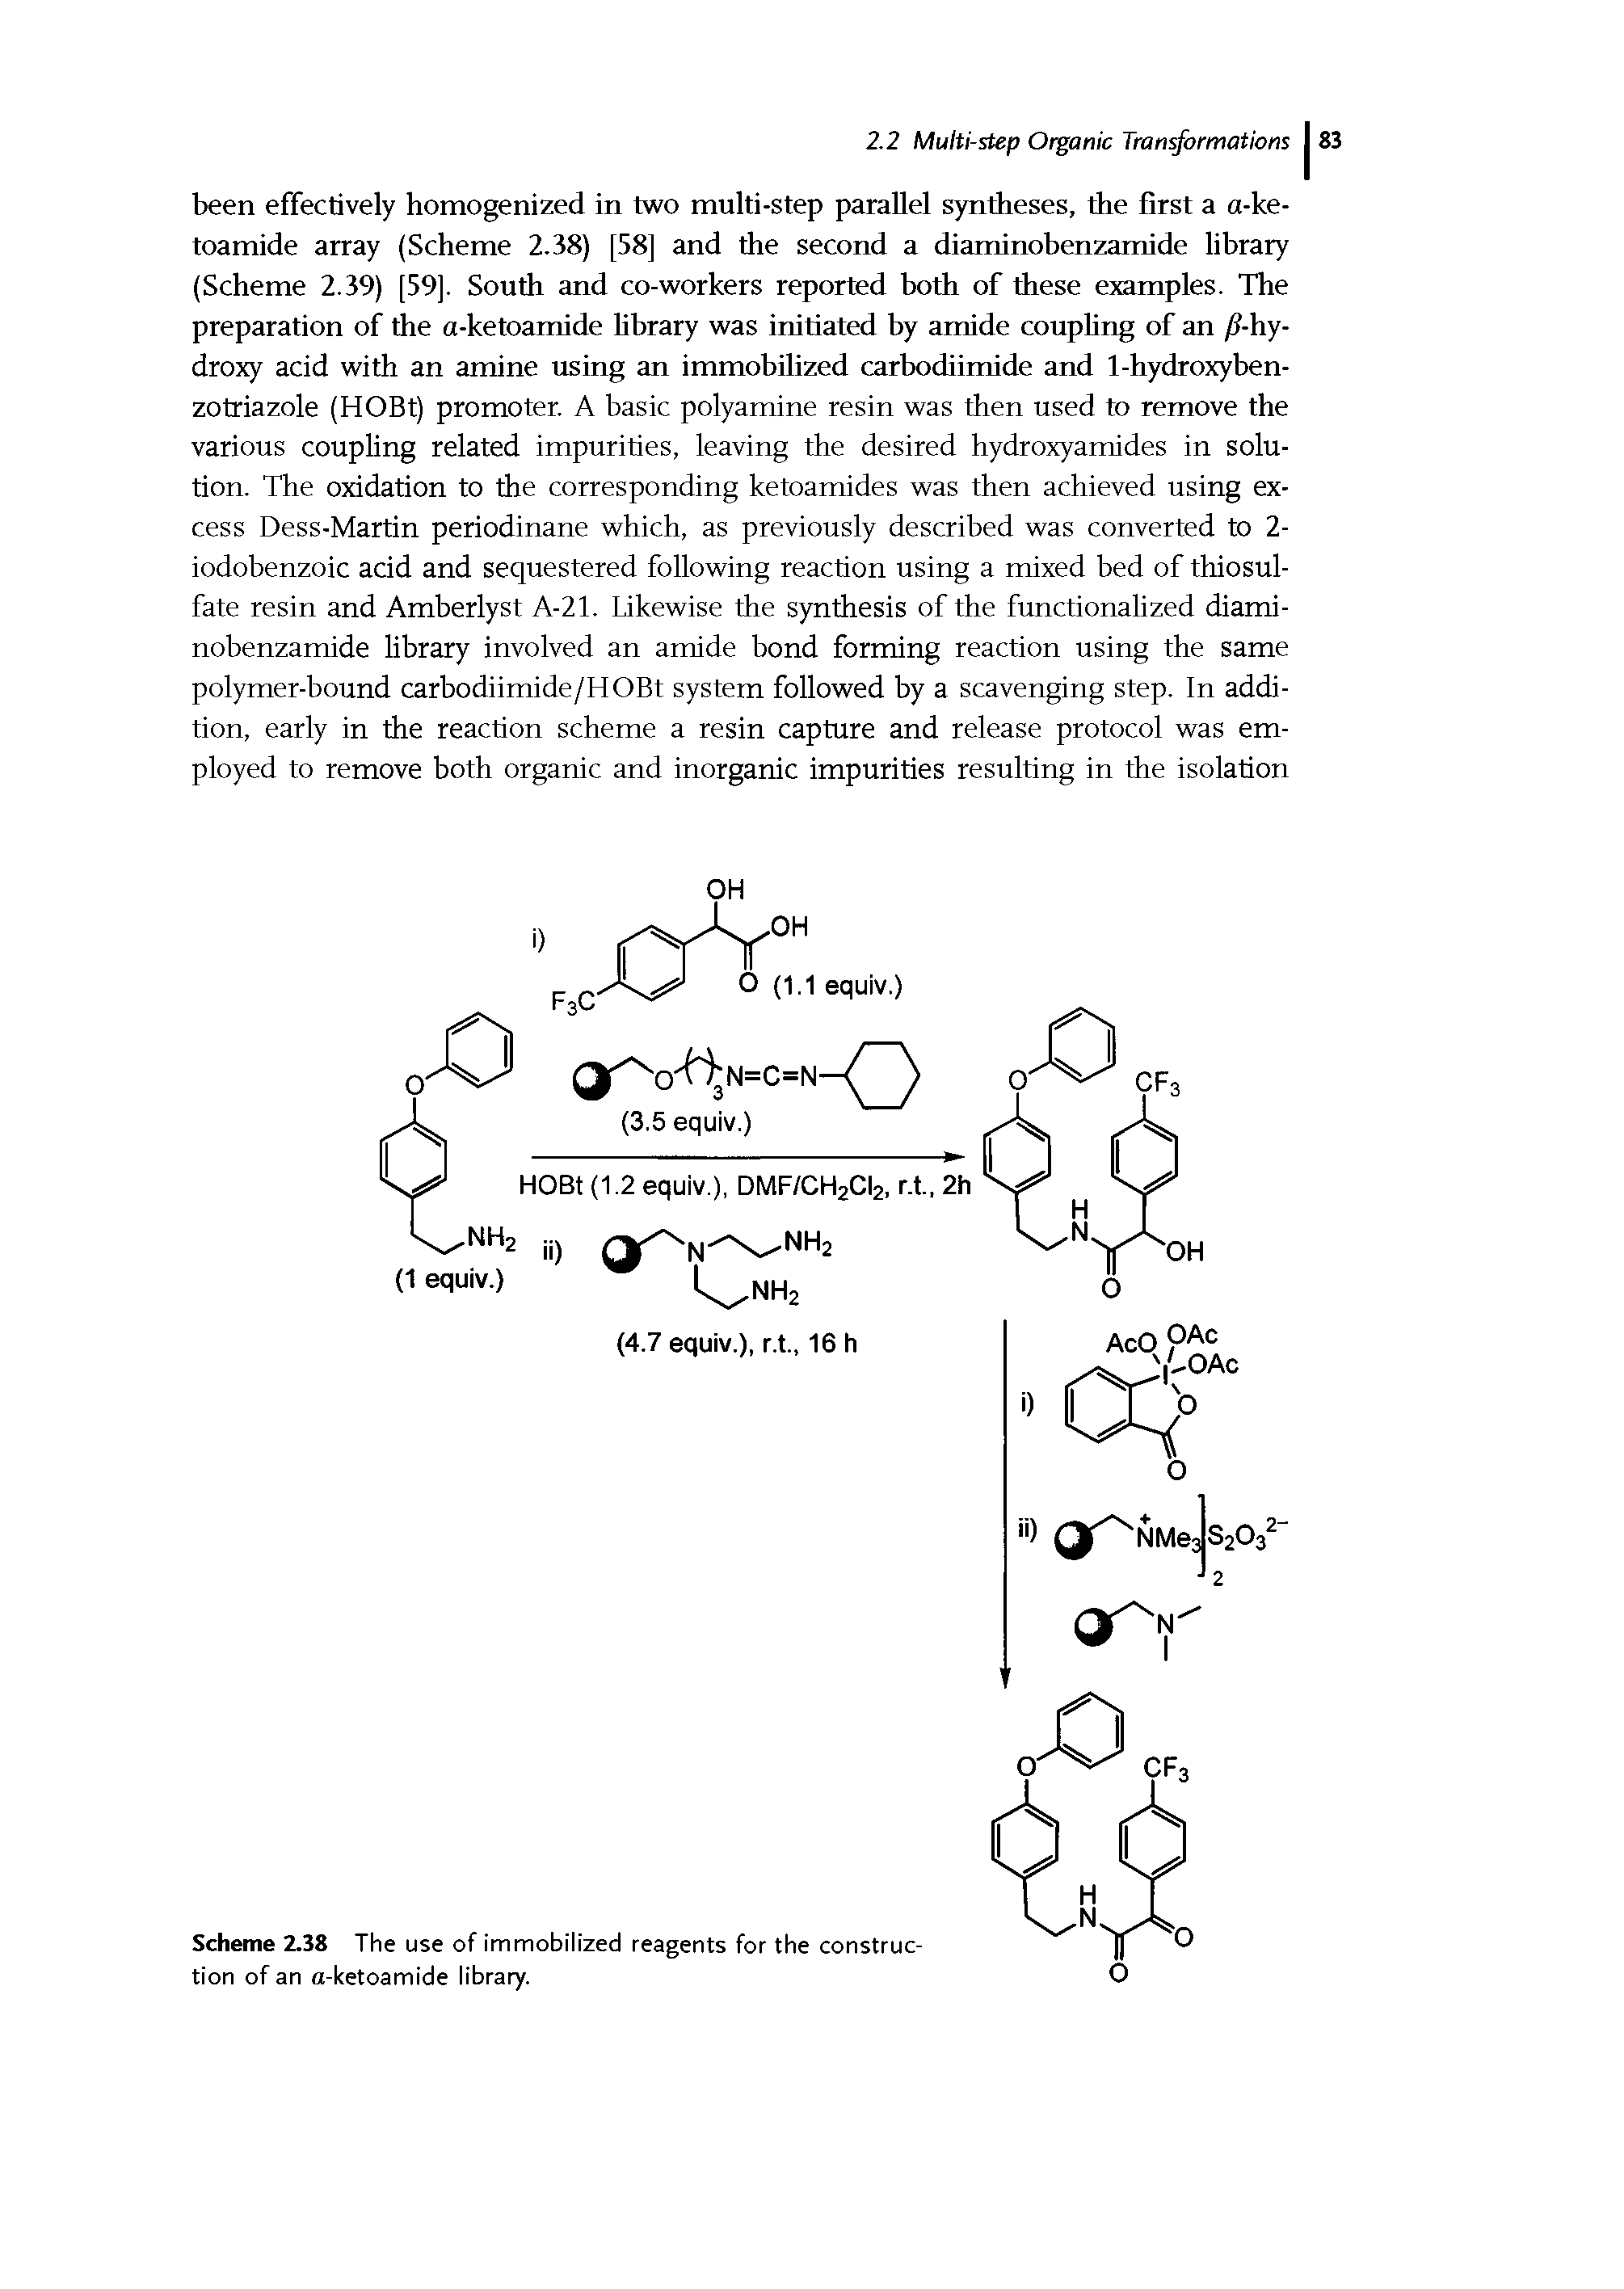 Scheme 2.38 The use of immobiiized reagents for the construction of an a-ketoamide iibrary.